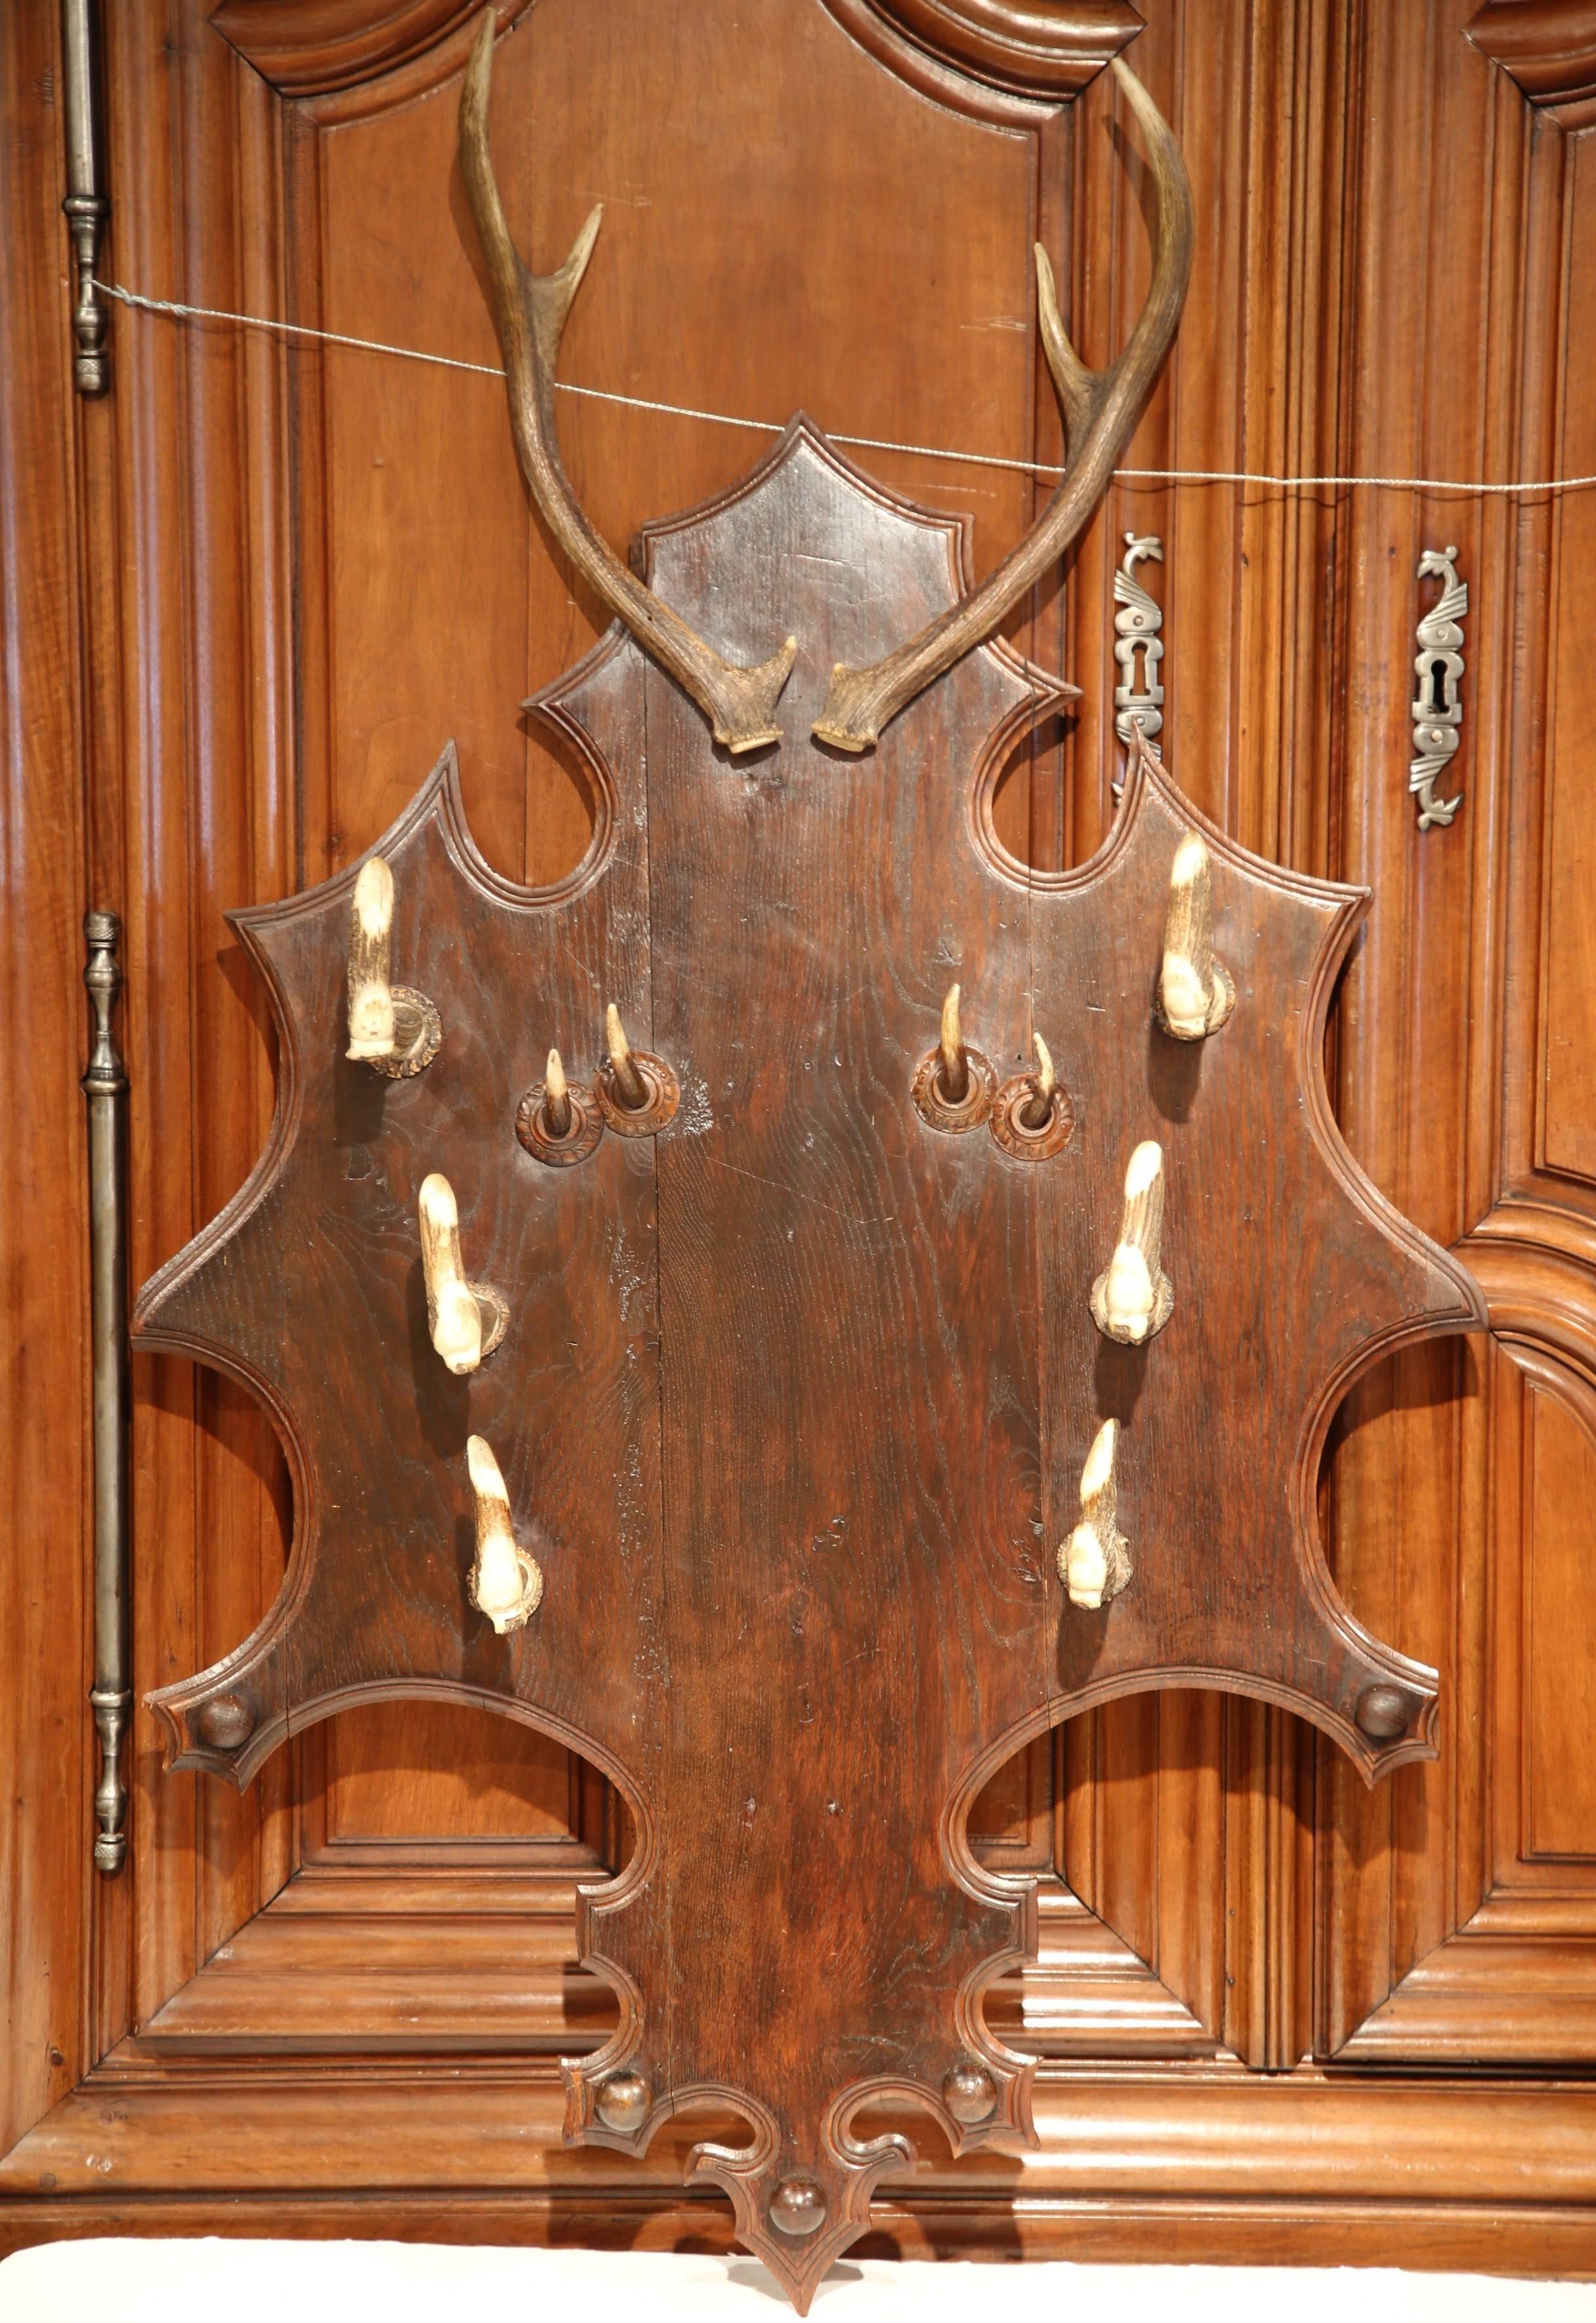 This antique, wood hanging rack was carved in the Pyrenees of France, circa 1880. The unique piece has a pair of antlers at the pediment, and different species of horns below on the plaque. The wooden wall rack could be used to hold three guns